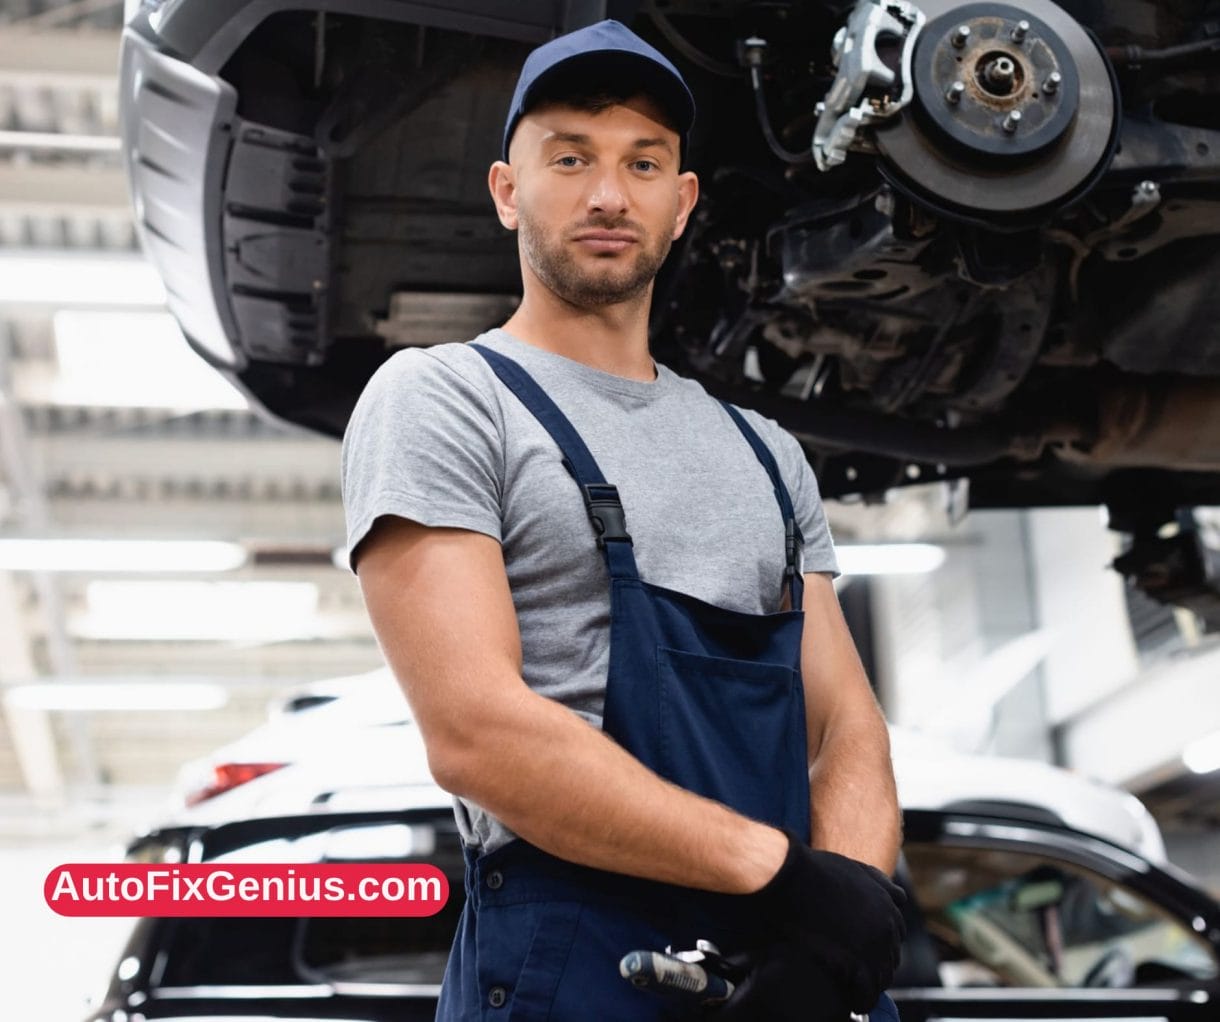 Expert Guidance To Maintain Your Vehicle